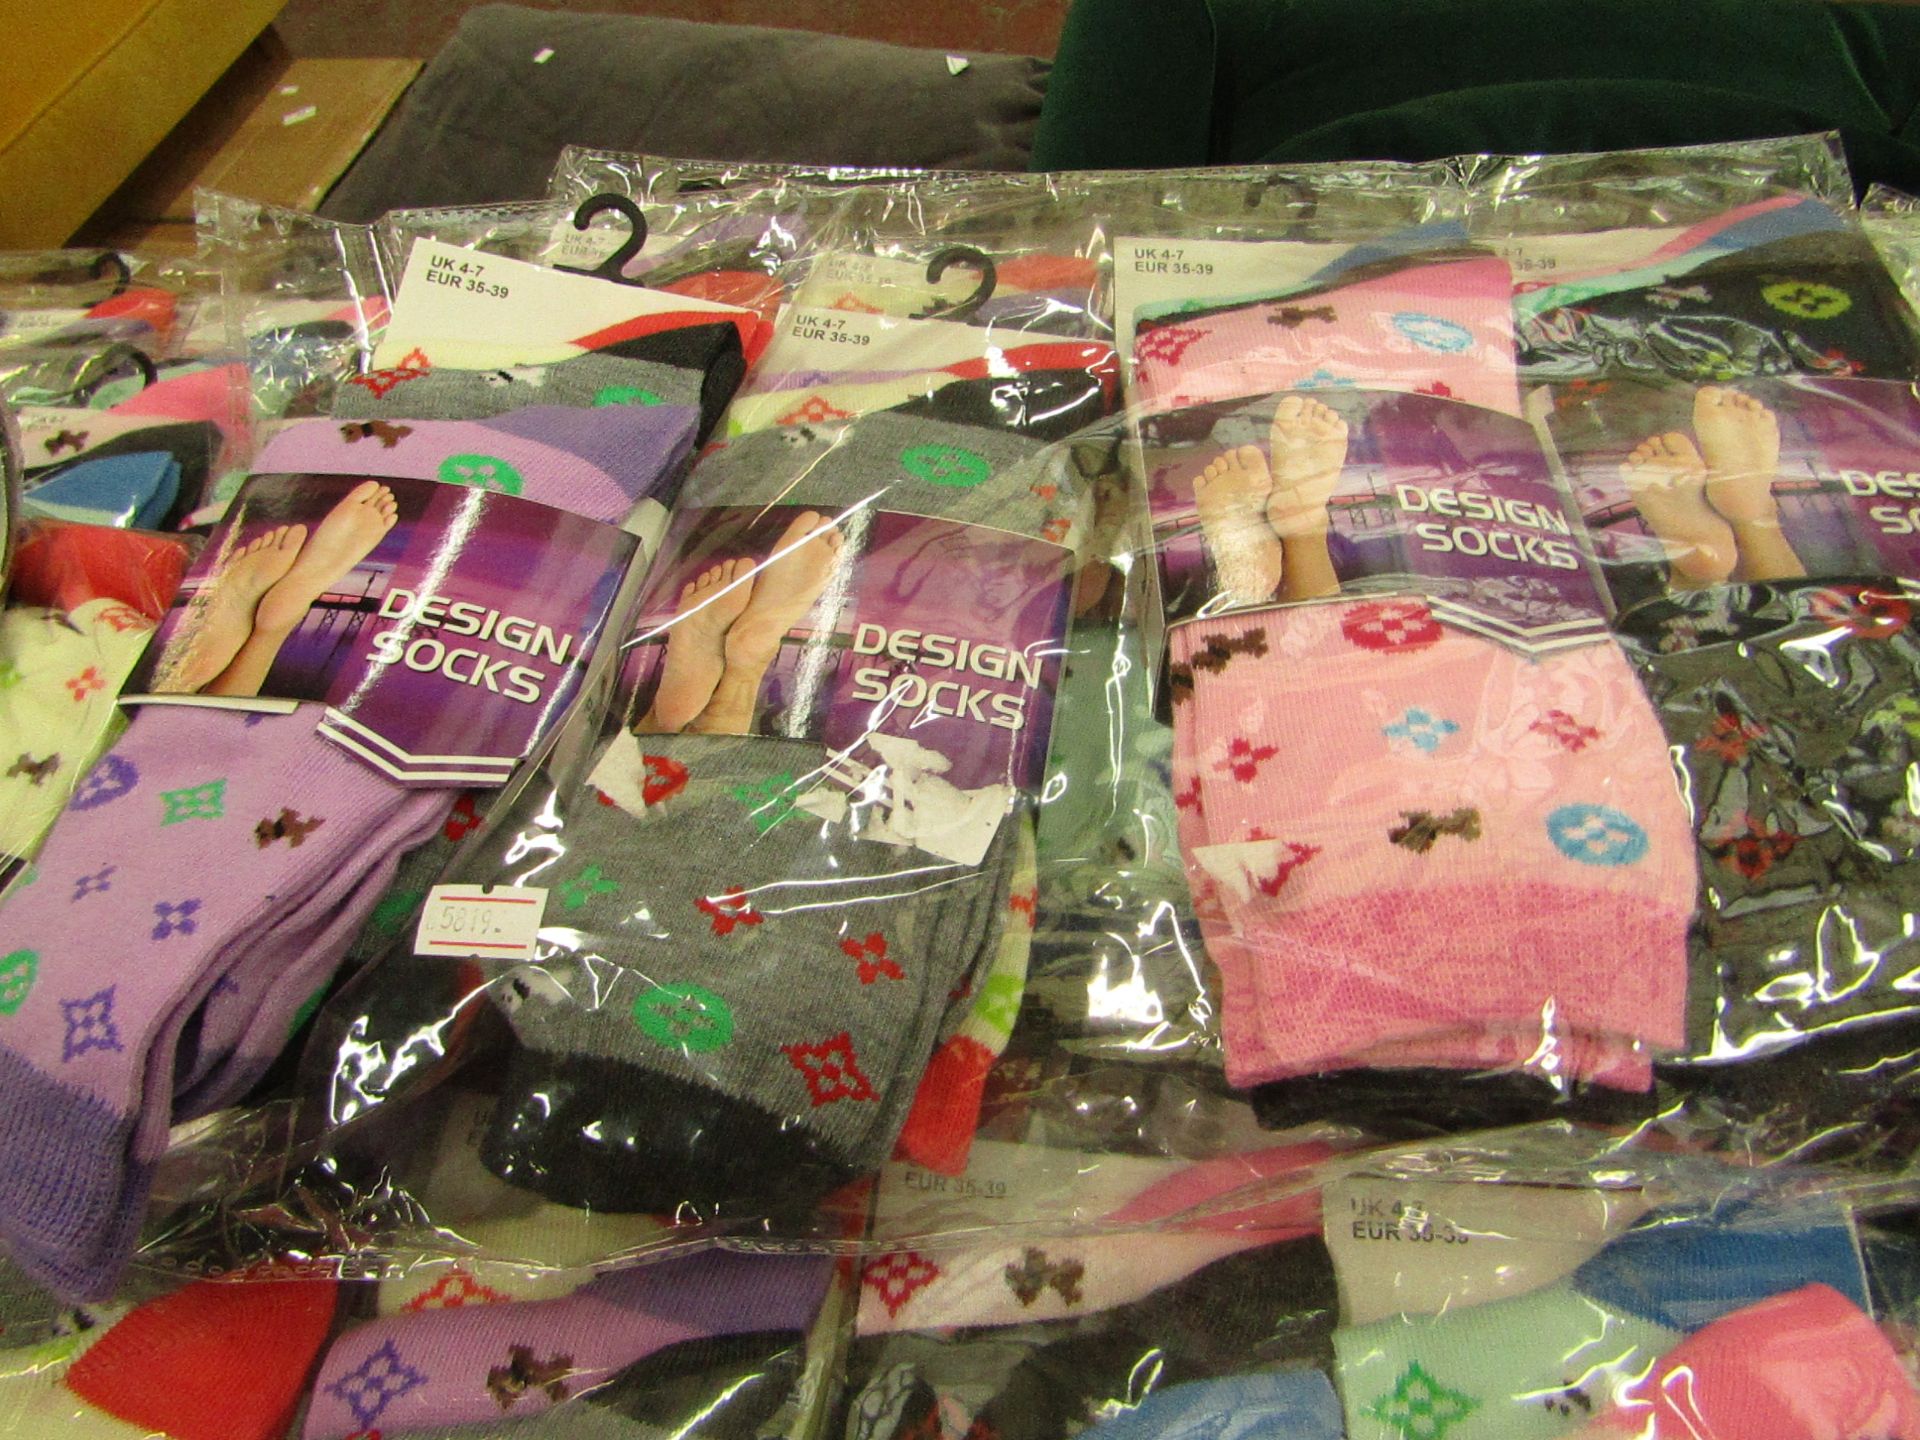 Pack of 12 x pairs Ladies Design Socks size 4-7 all new in packaging see image for design